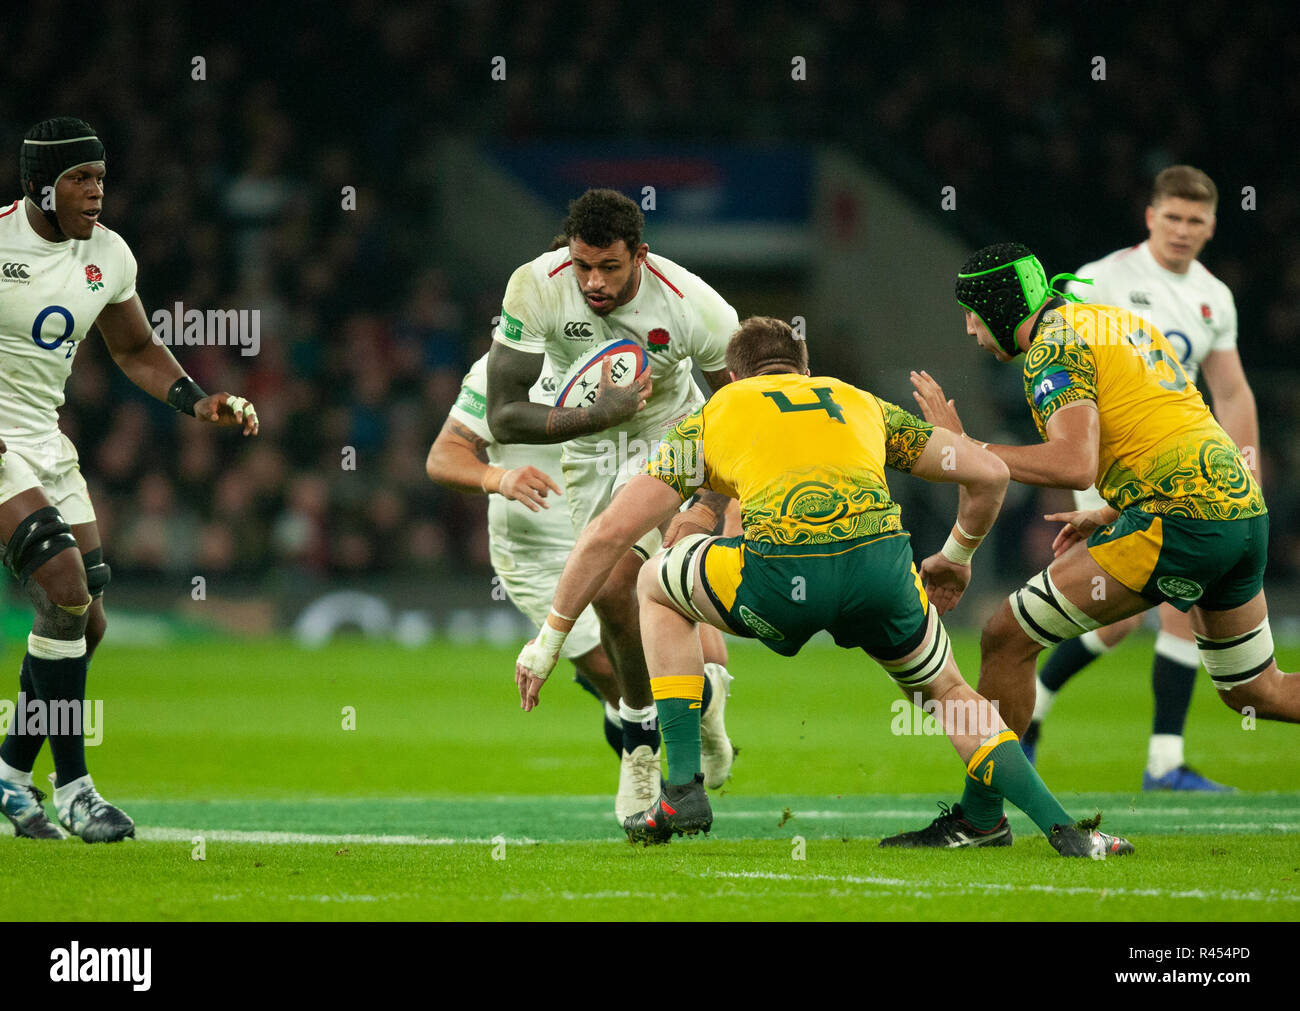 Twickenham, UK. 24th November 2018. England's Courtney Lawes runs with the ball during the Quilter International Rugby match between England and Australia. Andrew Taylor/Alamy Live News Stock Photo